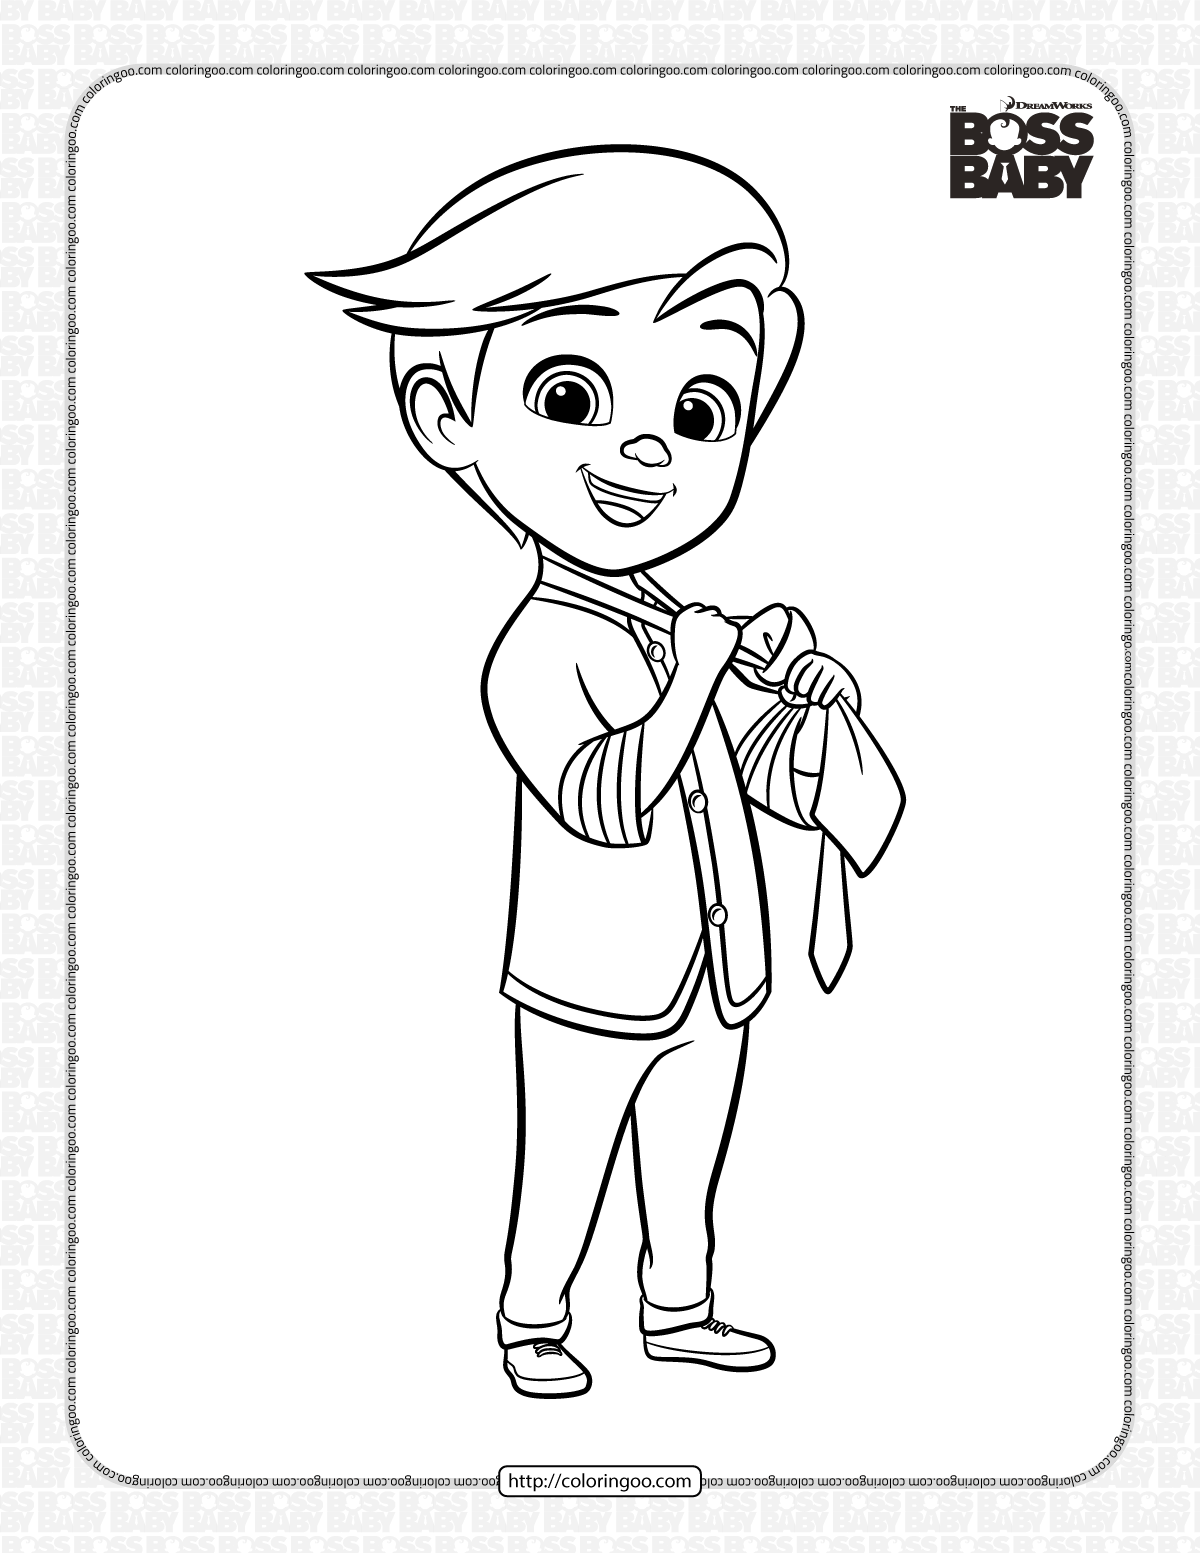 the boss baby brother tim coloring page